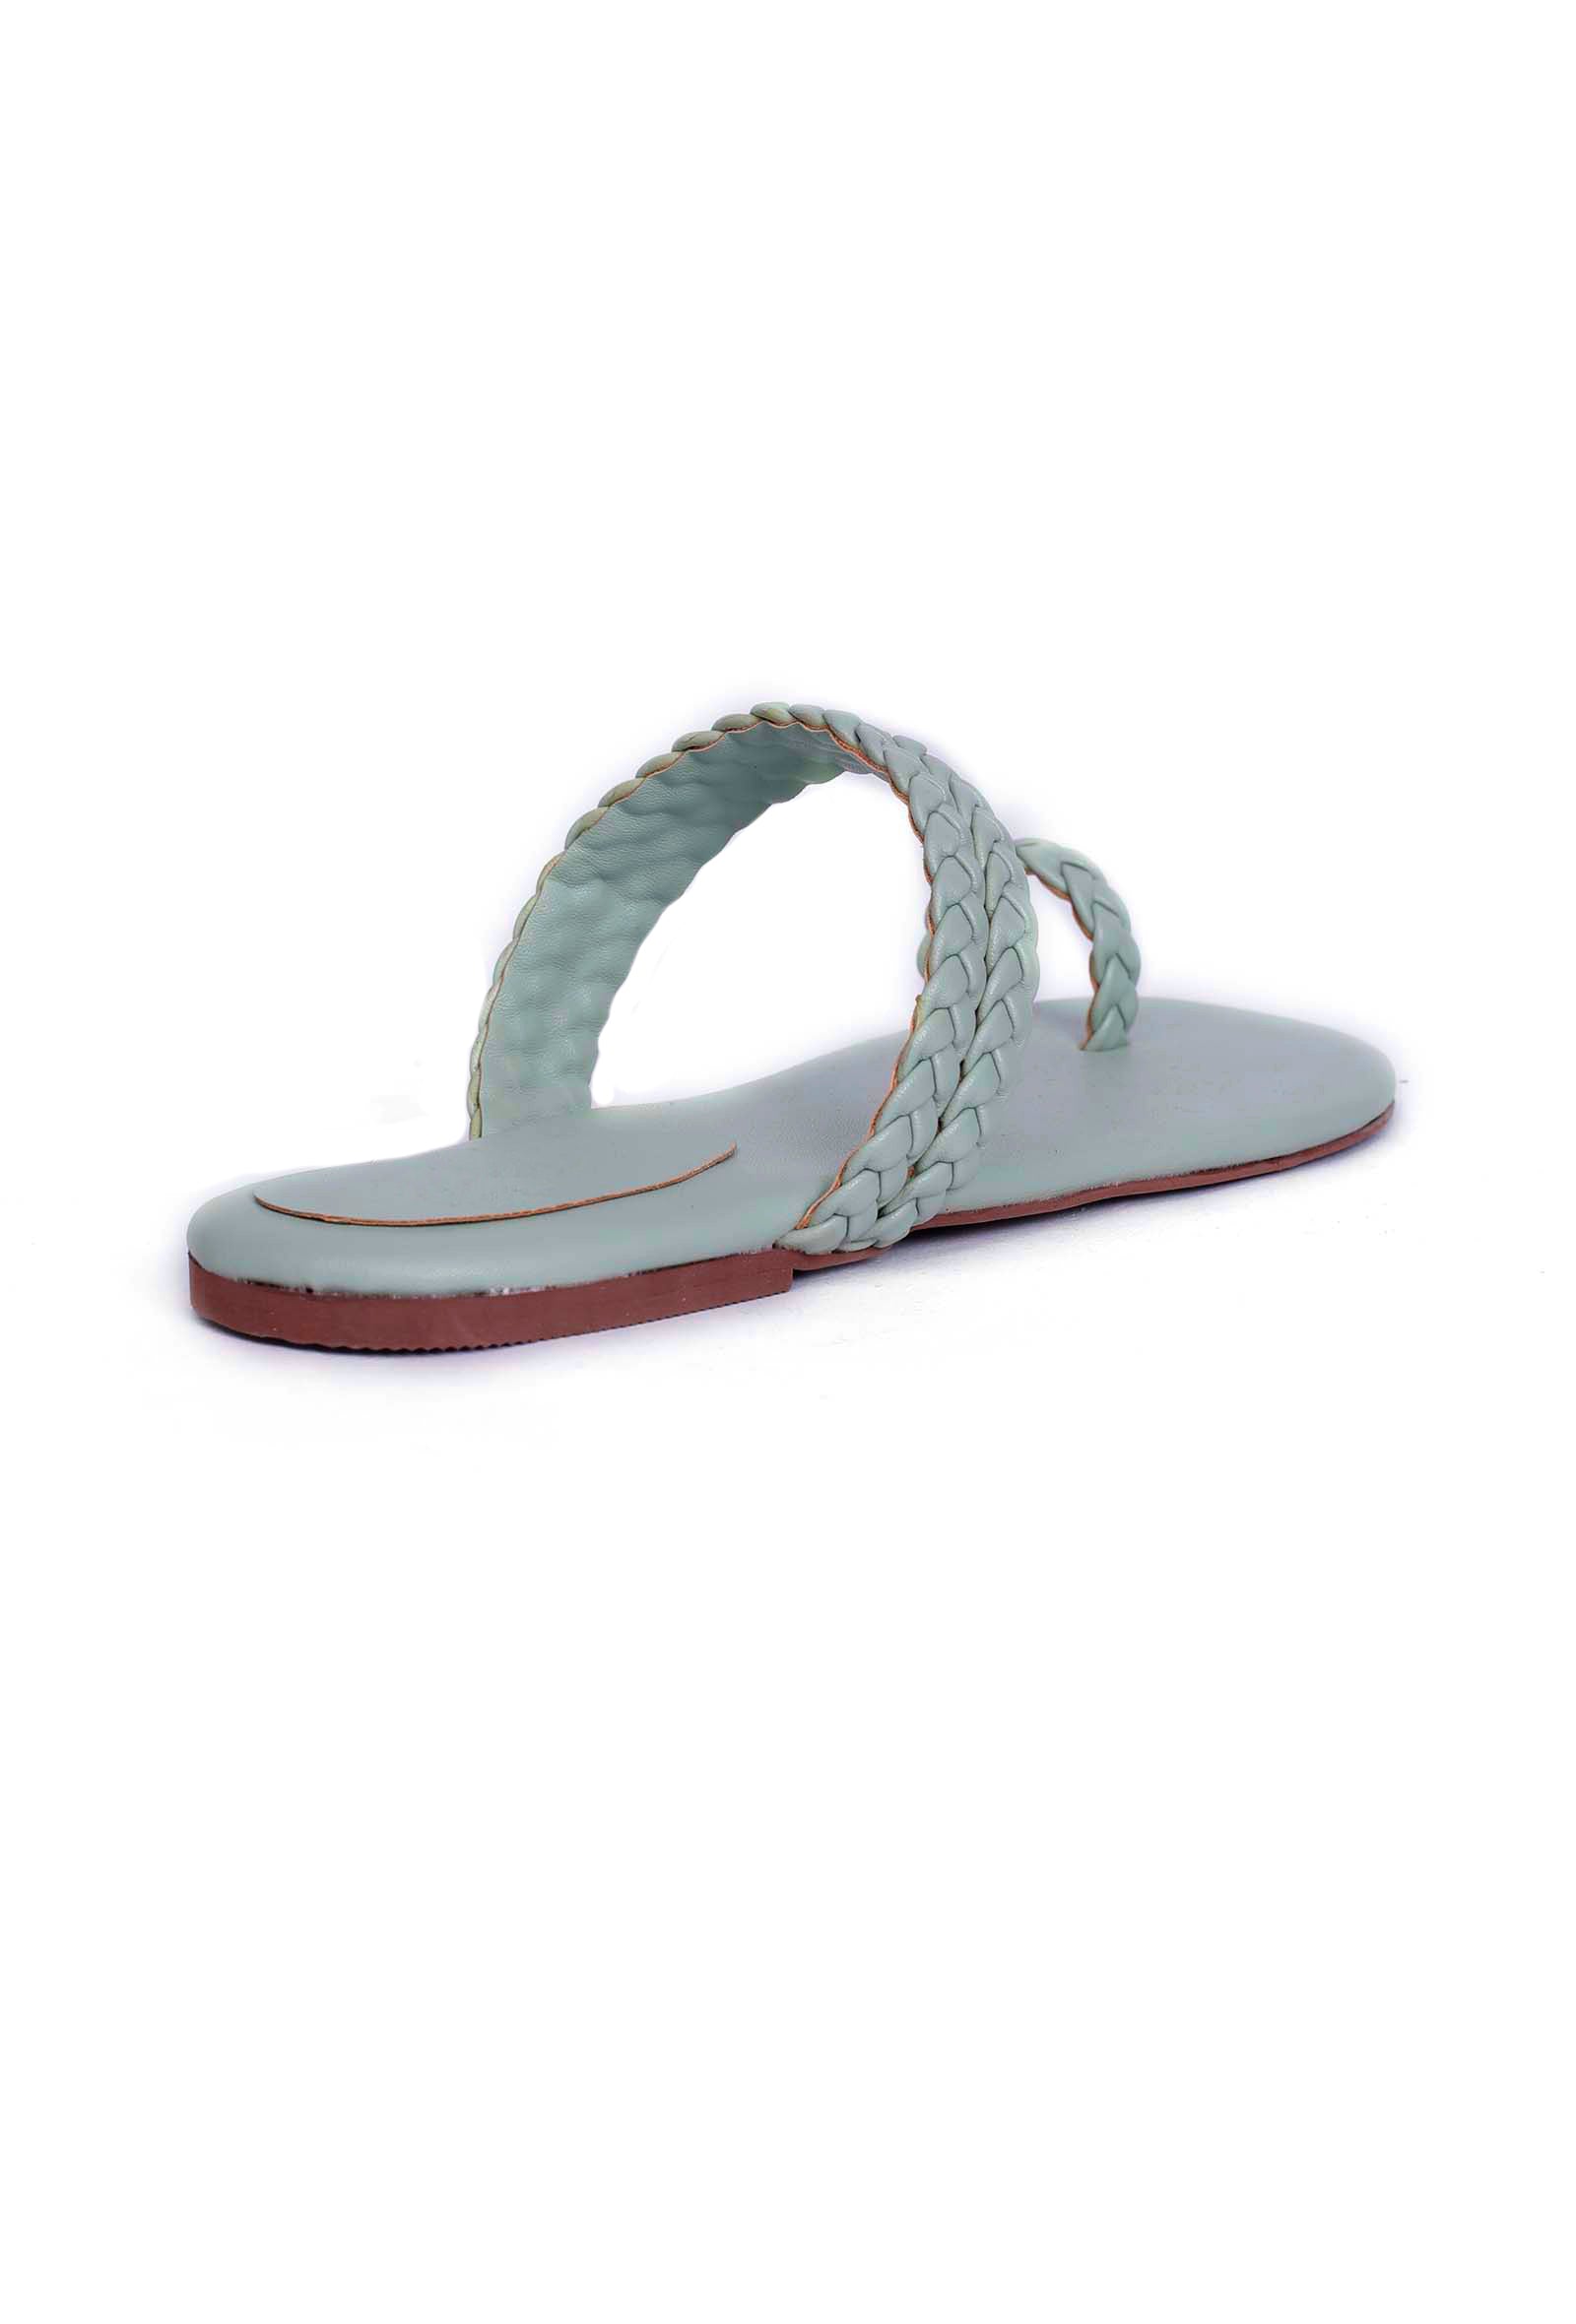 Powdered Blue Knotted Cruelty Free Leather Sandals